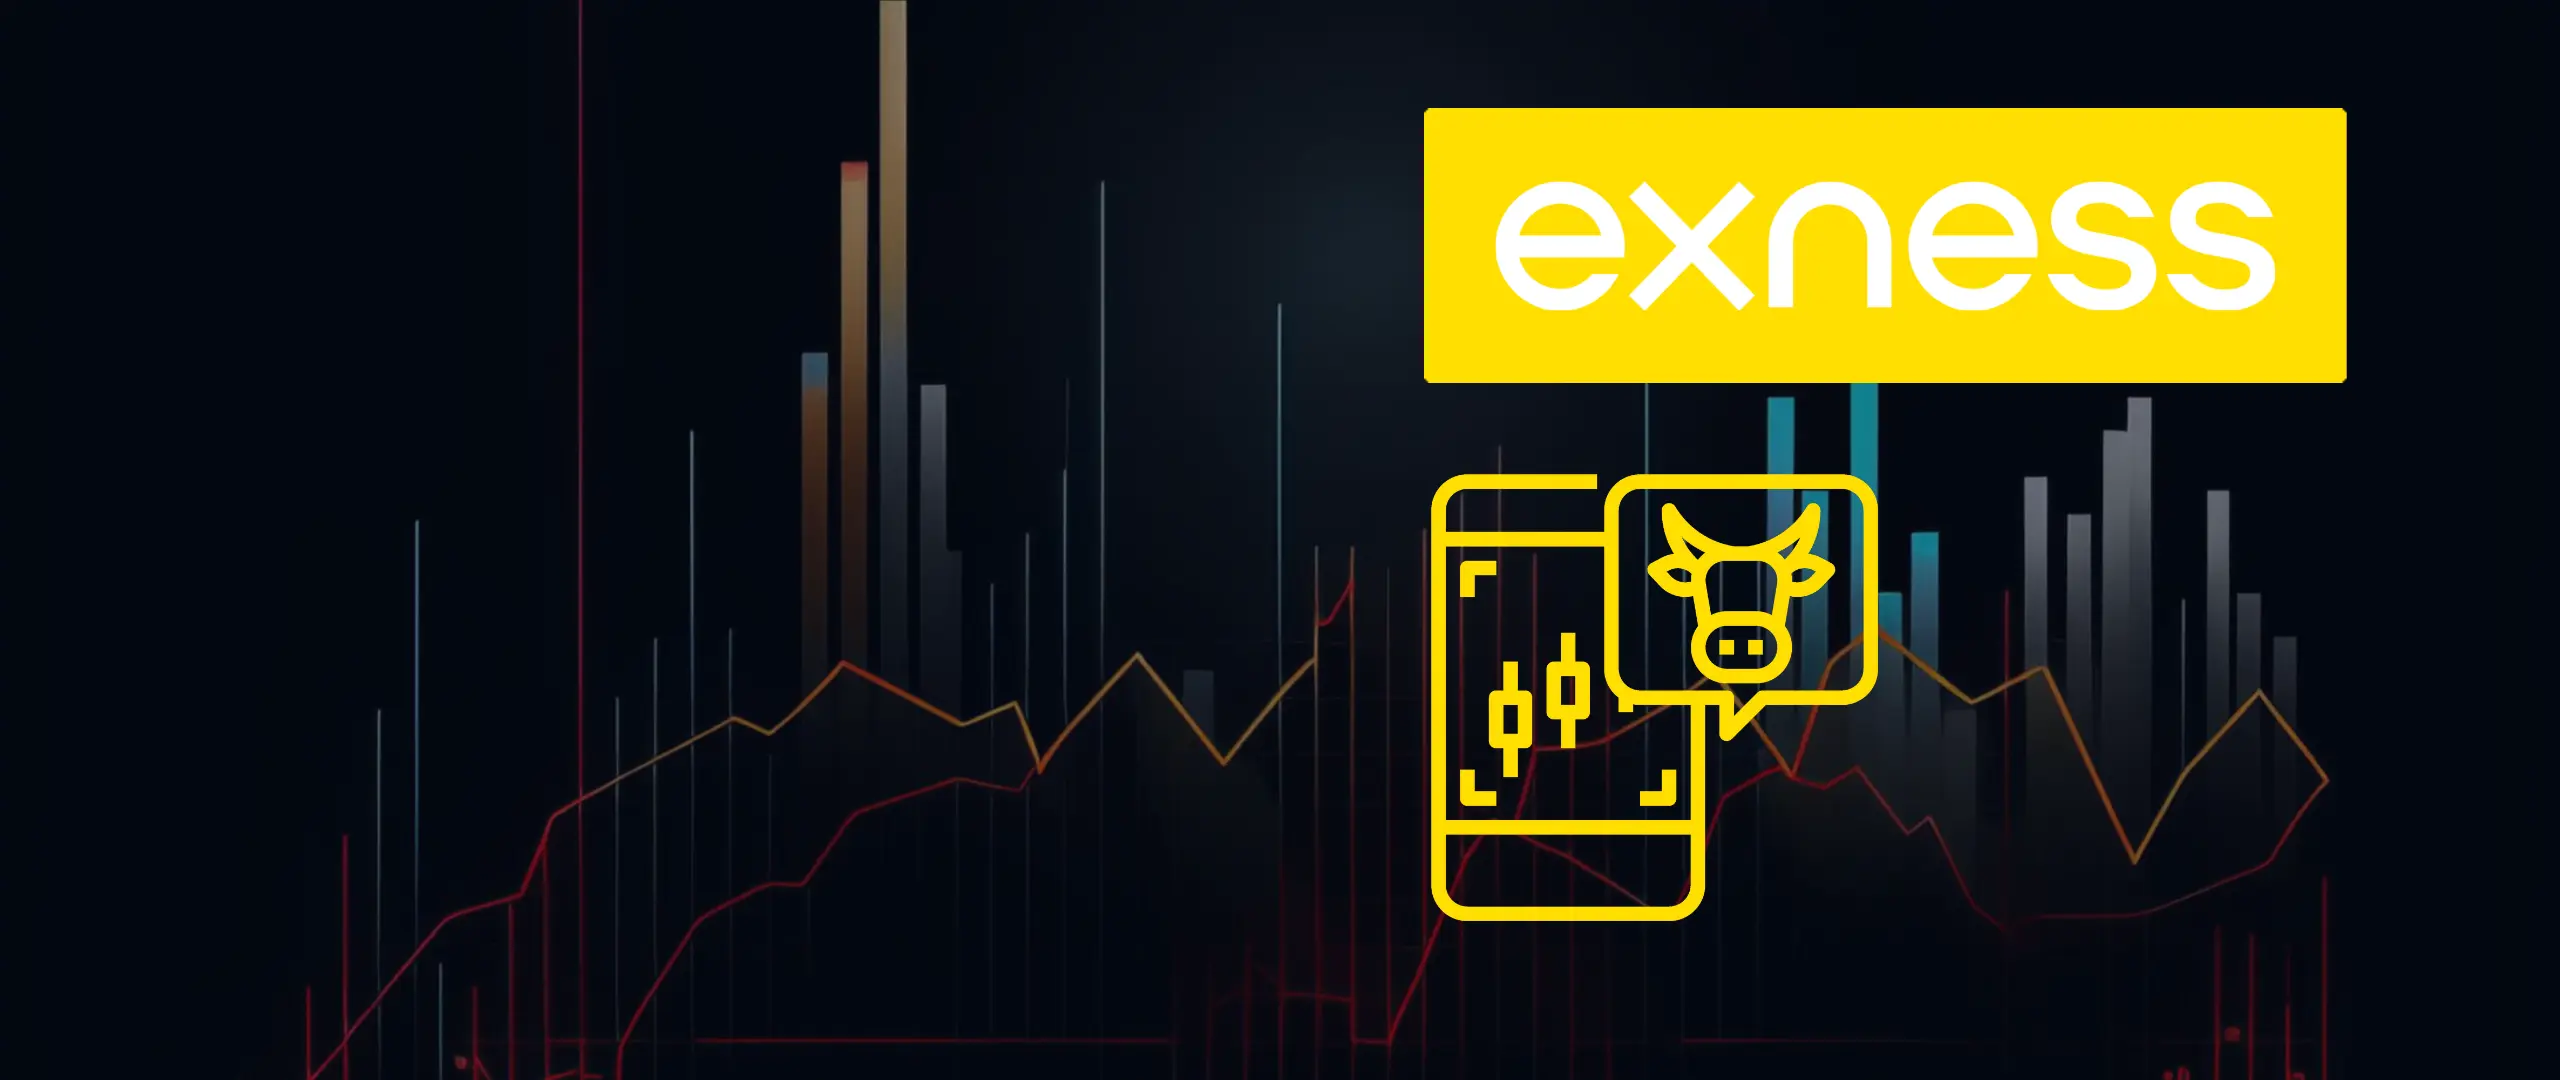 Download Exness: Android APK and iPhone Mobile App